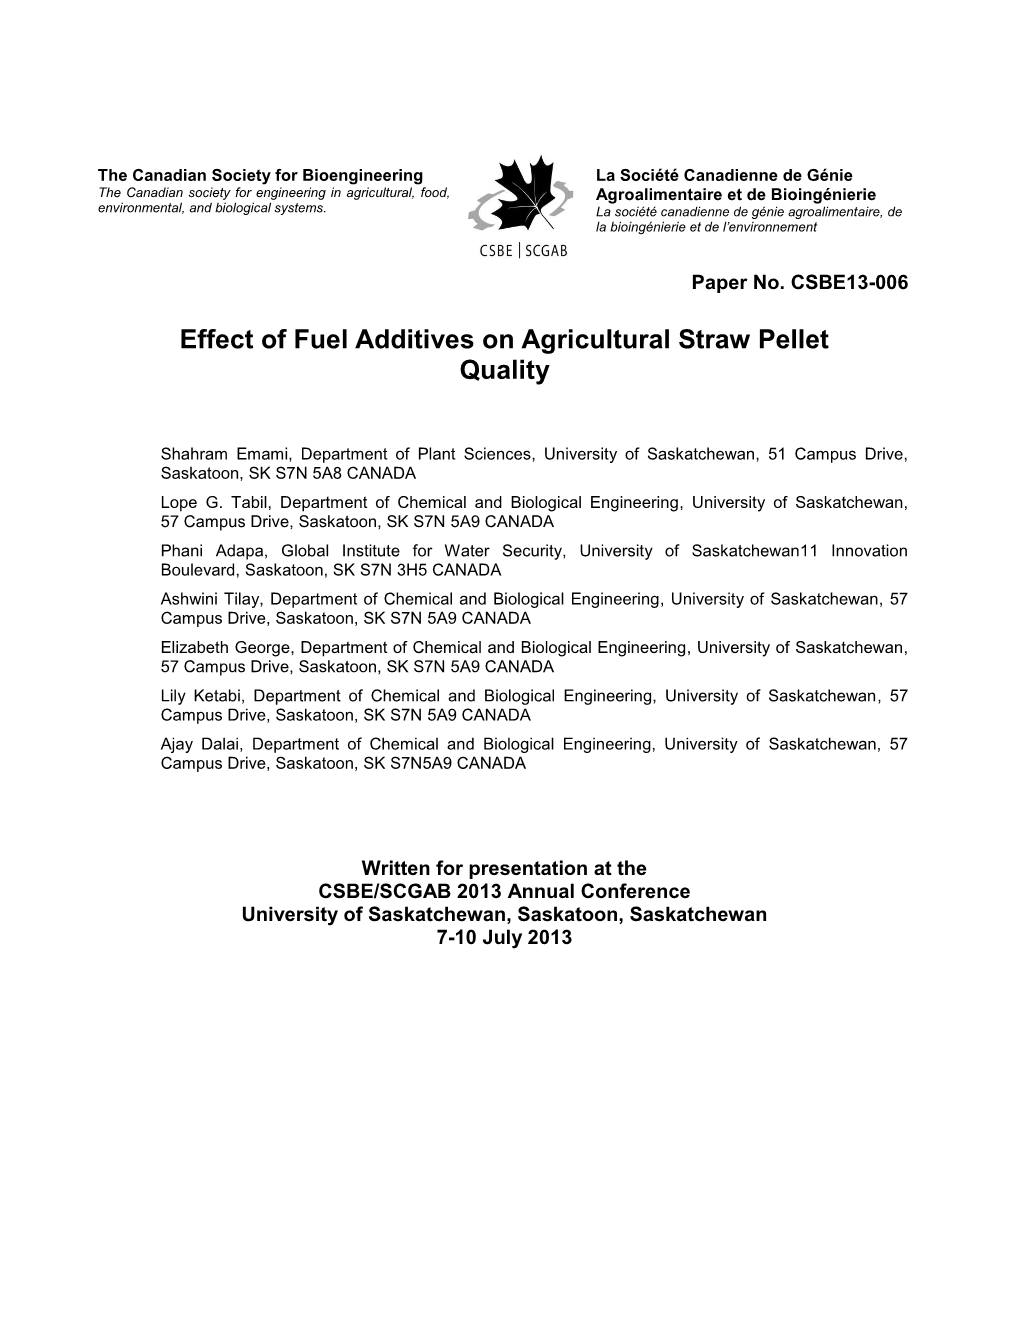 Effect of Fuel Additives on Agricultural Straw Pellet Quality